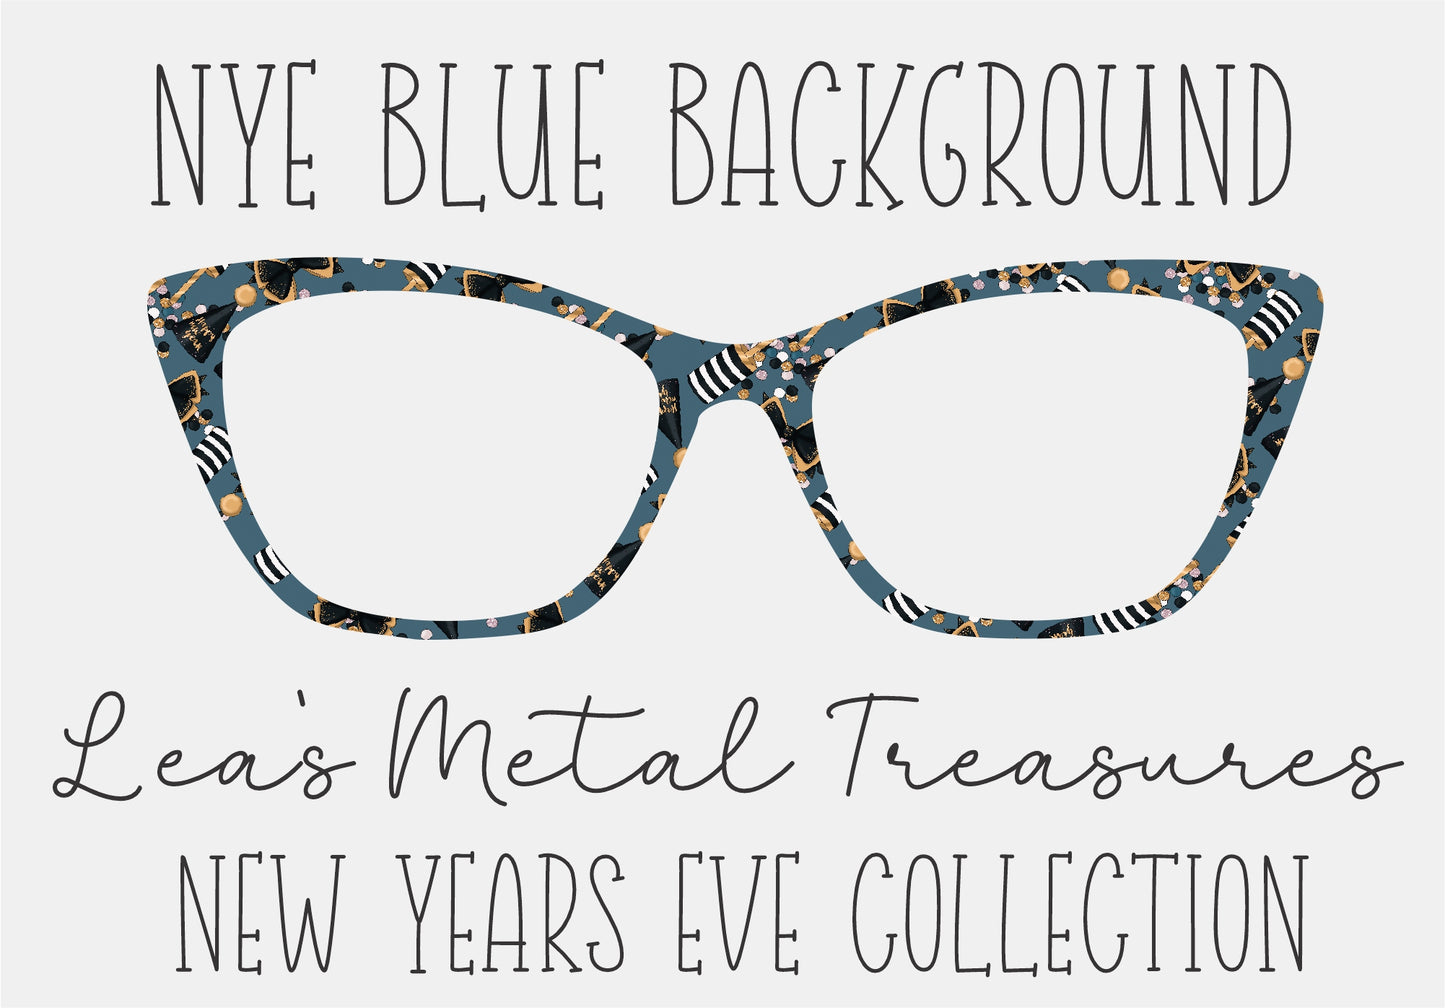 NYE BLUE BACKGROUND Eyewear Frame Toppers COMES WITH MAGNETS